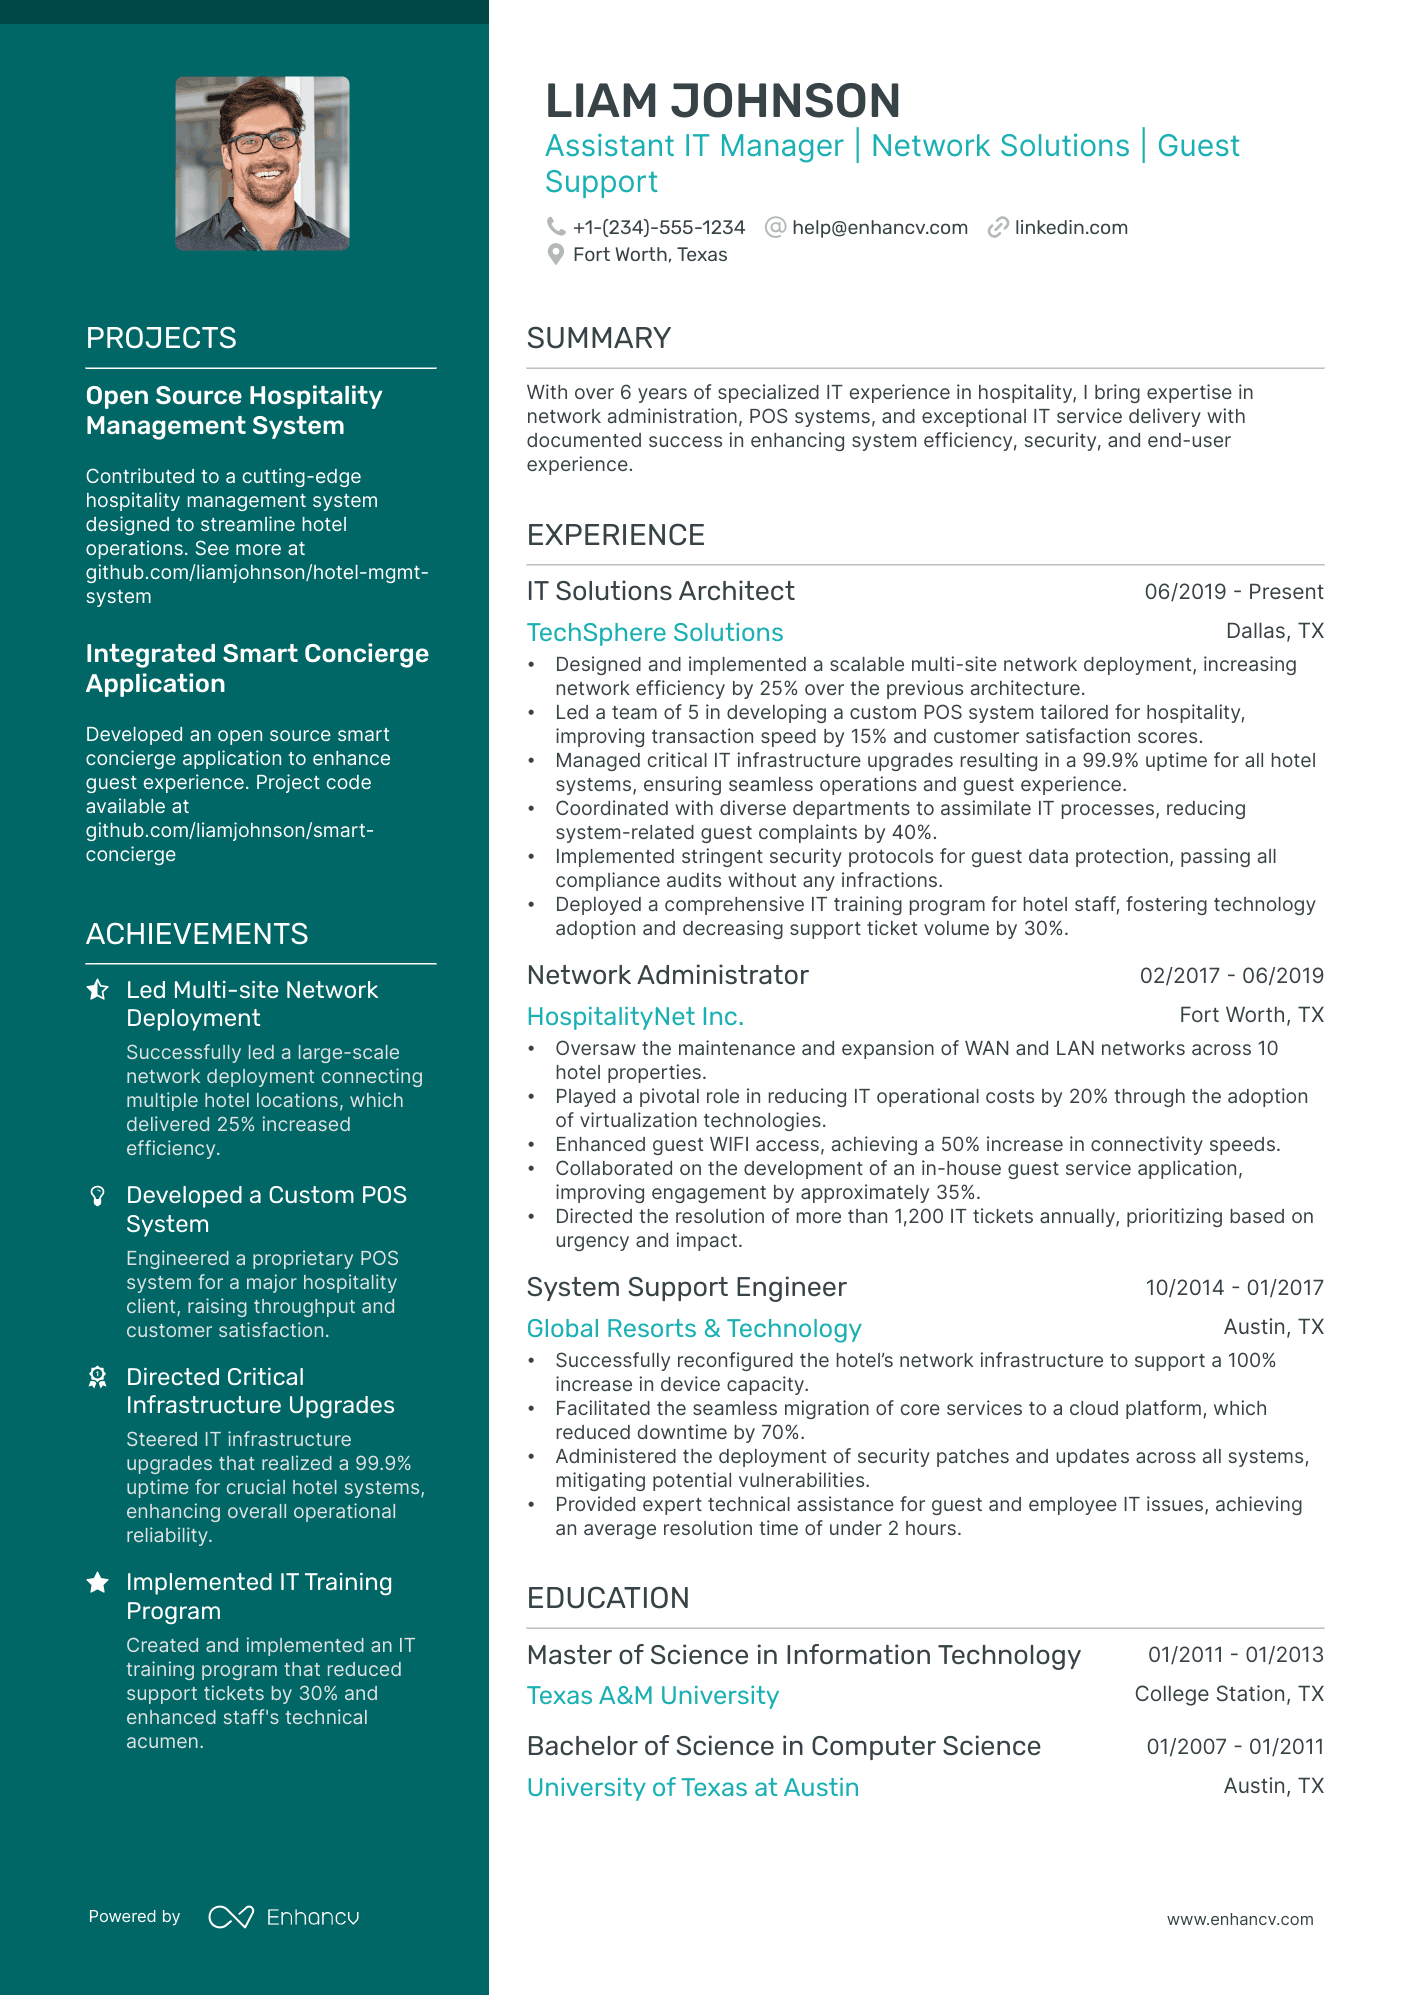 job skills for assistant manager resume